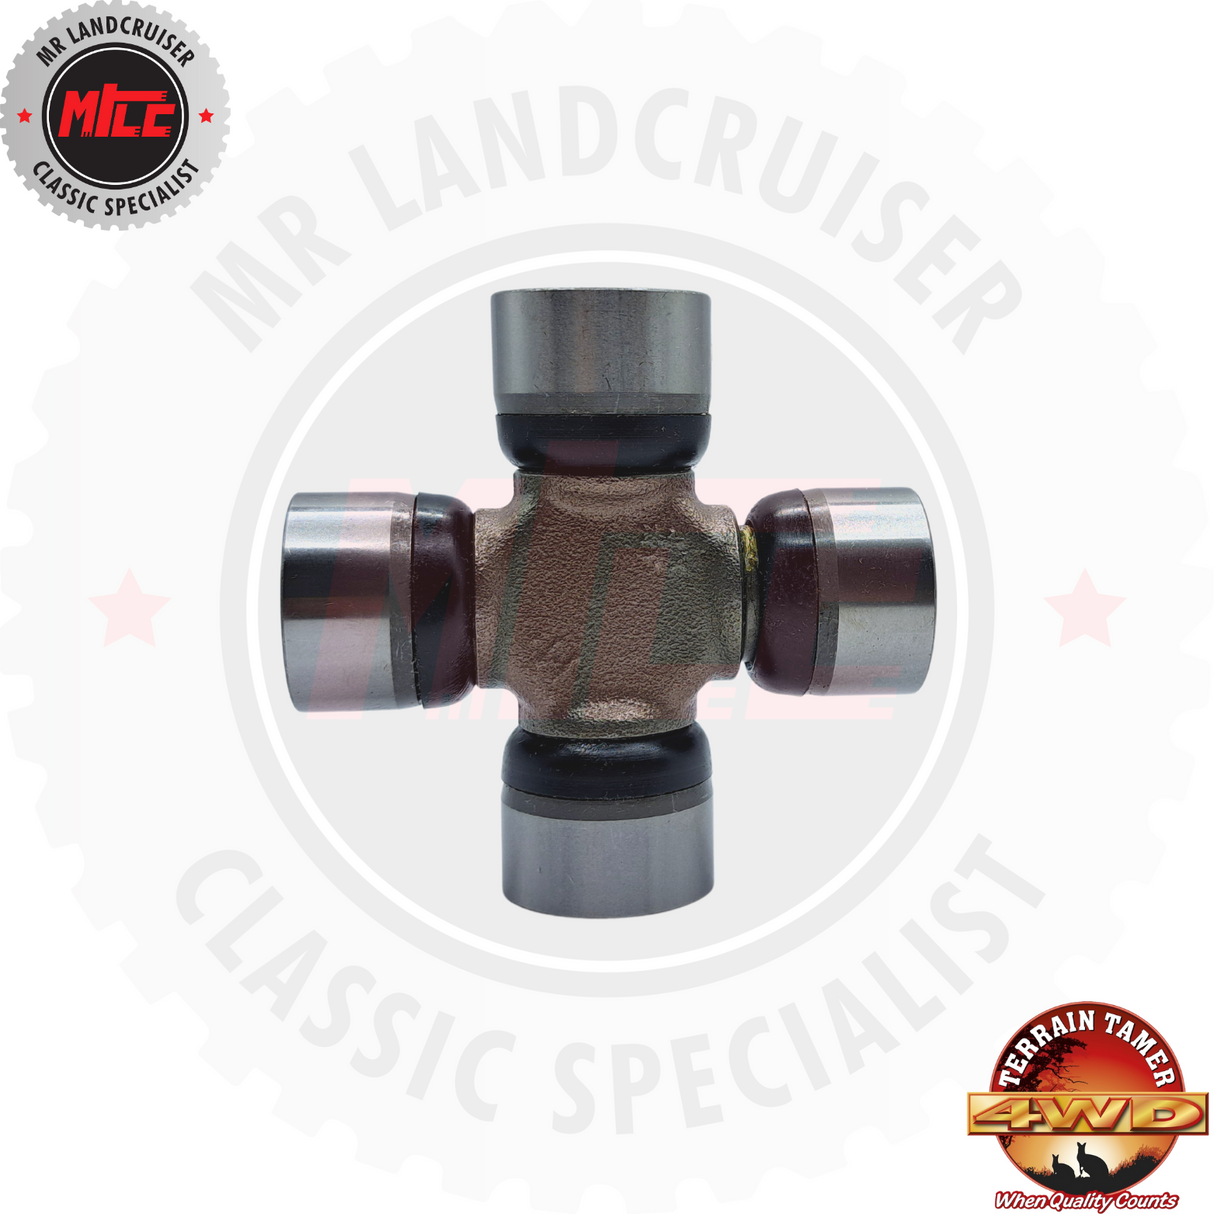 Rear view of Universal Joint Kit Front & Rear suitable for 40 & 45 series Toyota Landcruiser 